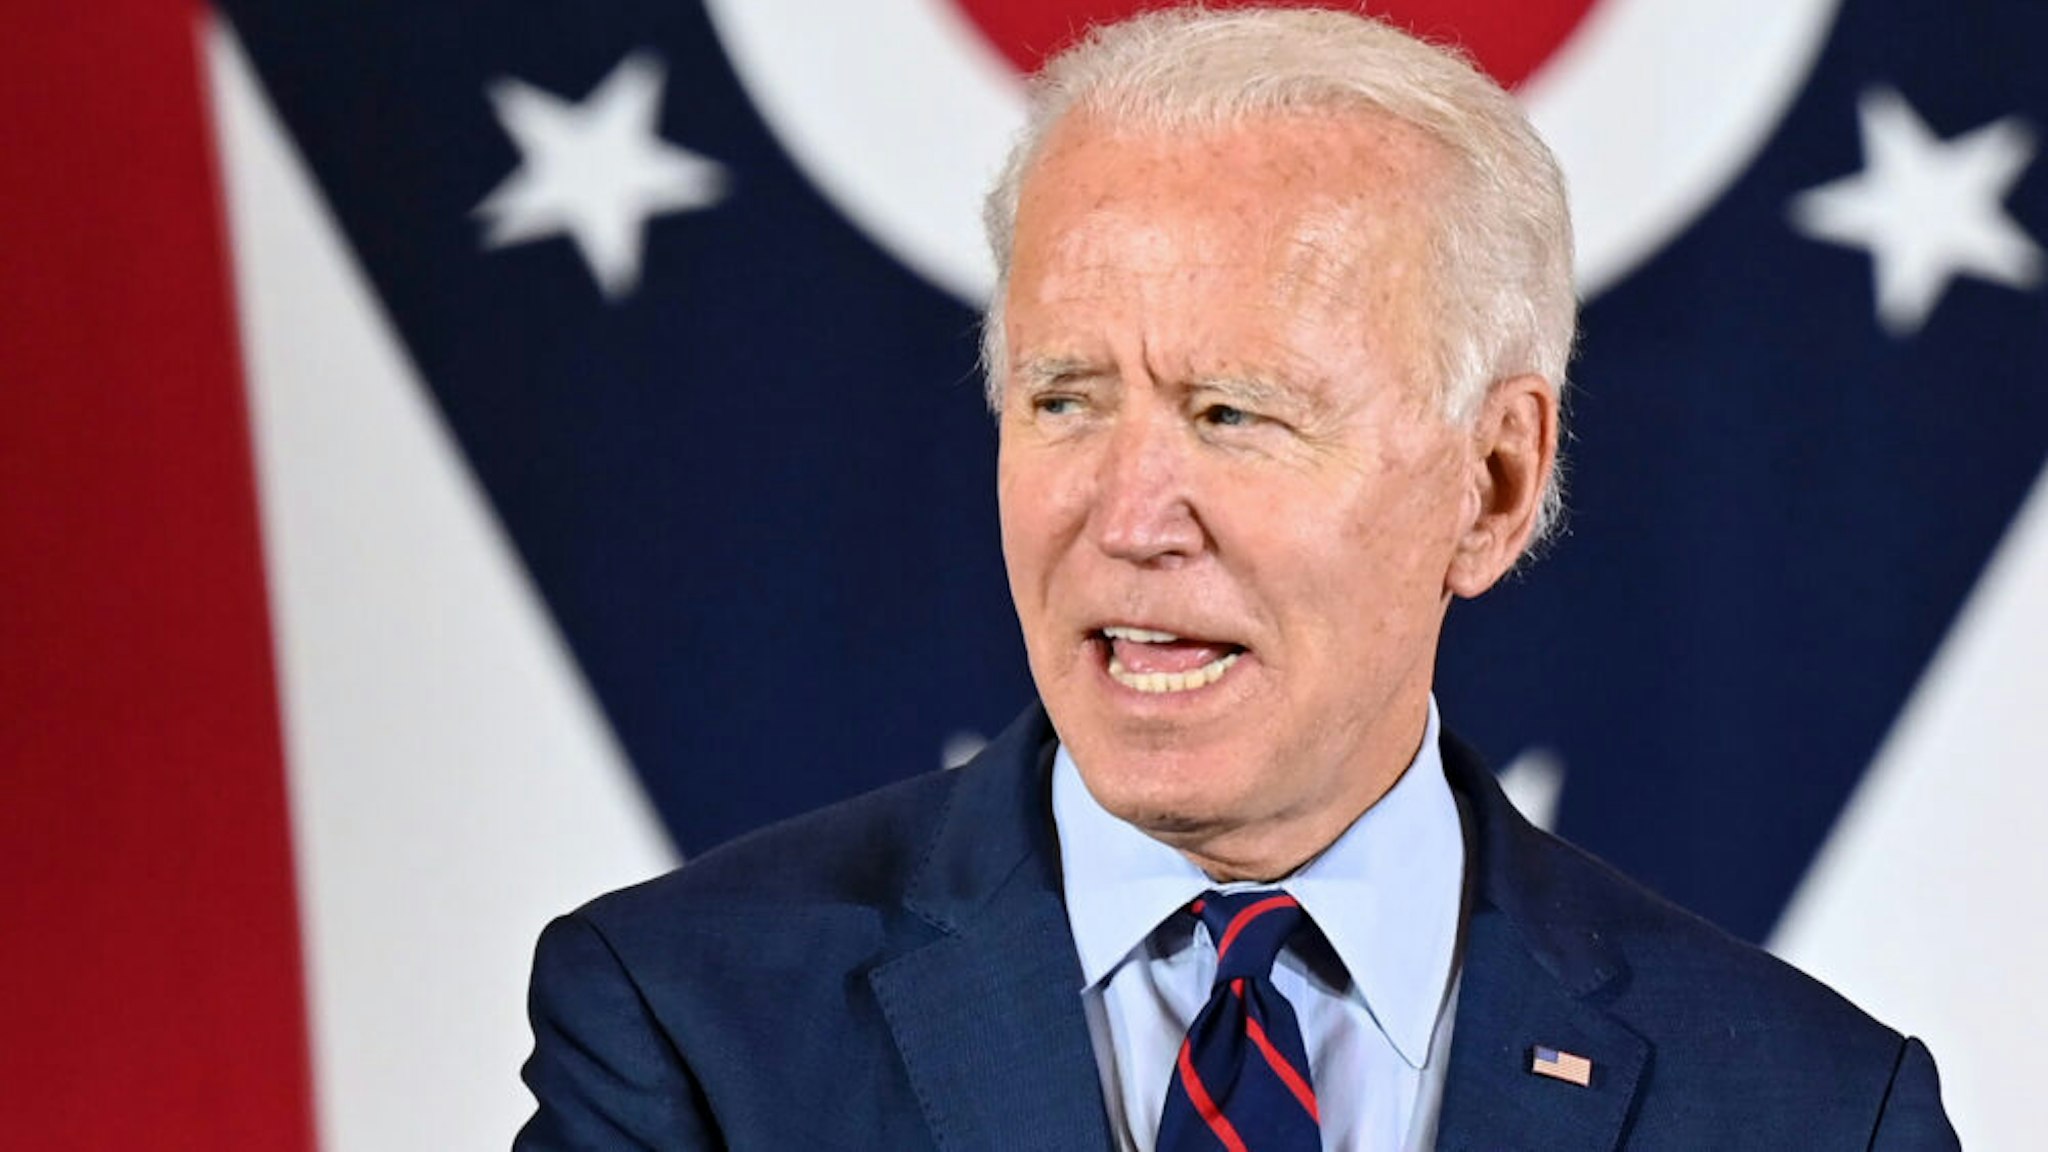 Democratic Presidential candidate and former Vice President Joe Biden delivers remarks at a voter mobilization event in Cincinnati, Ohio, on October 12, 2020, where he will speak to the importance of Ohioans making their voices heard this election.